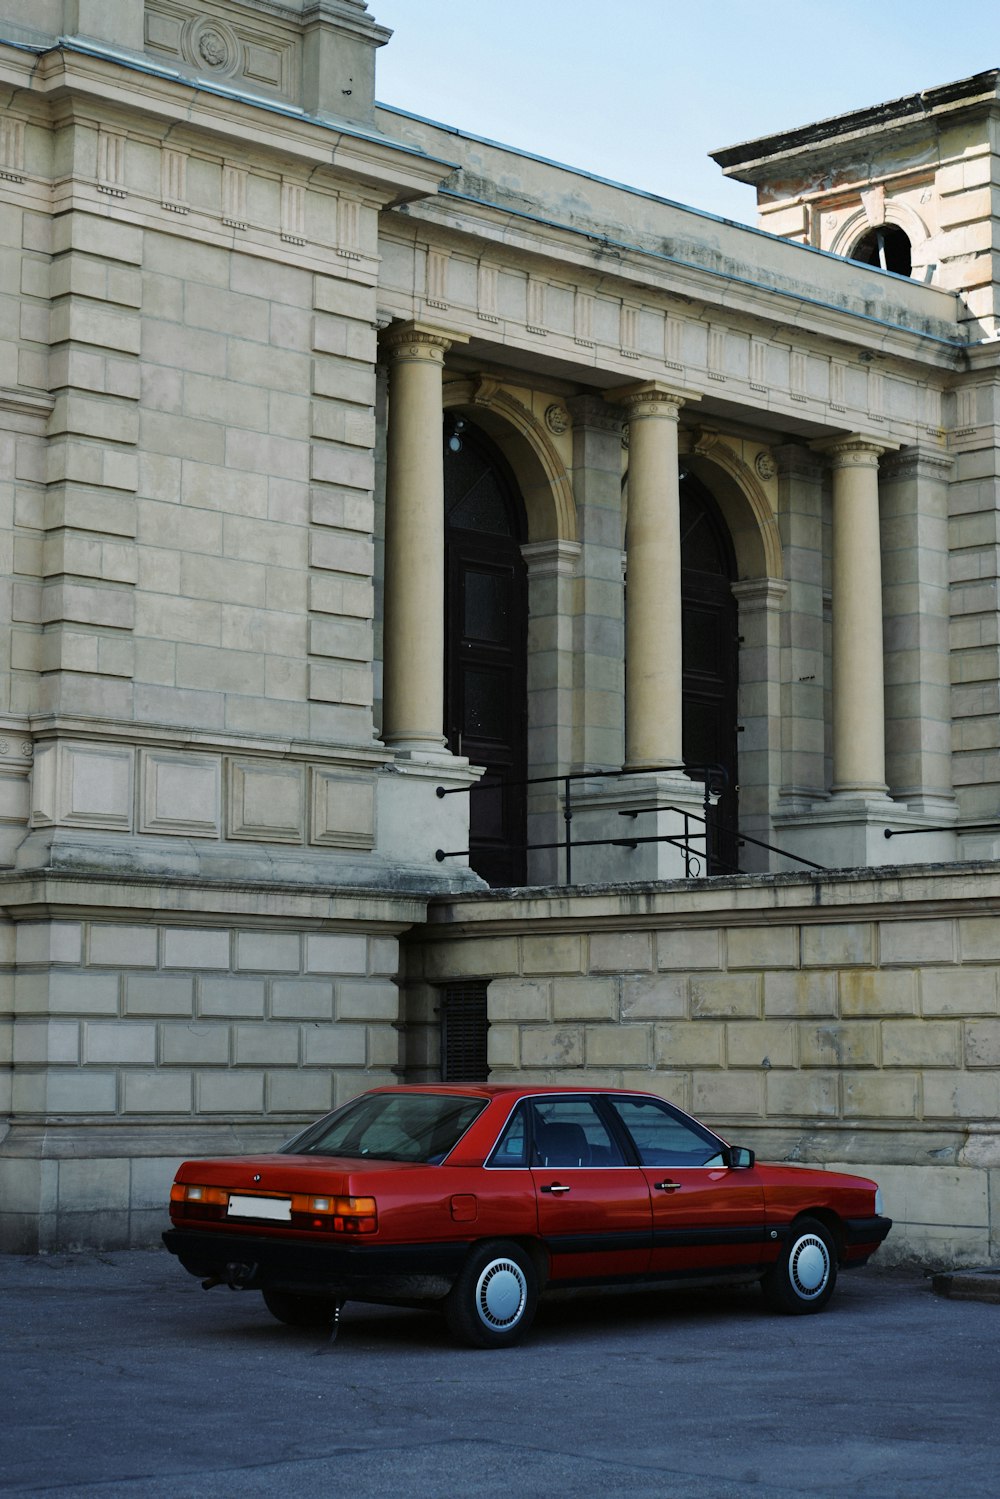 a red car parked in front of a building with columns